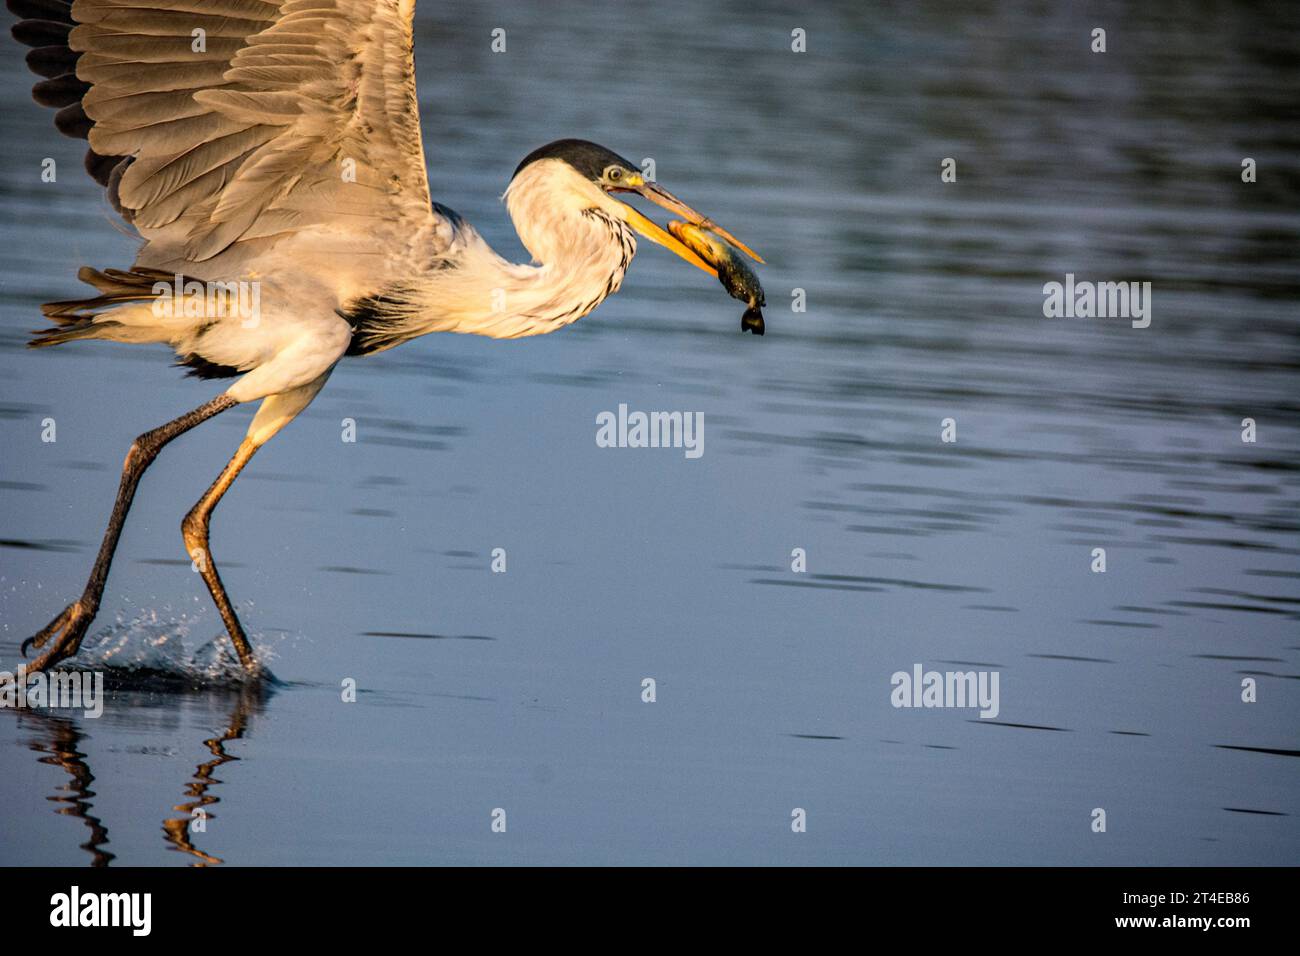 Cocoi Heron or White-necked Heron, Ardea cocoi, fishing in a river in the Pantanal, Mato Grosso, Brazil Stock Photo